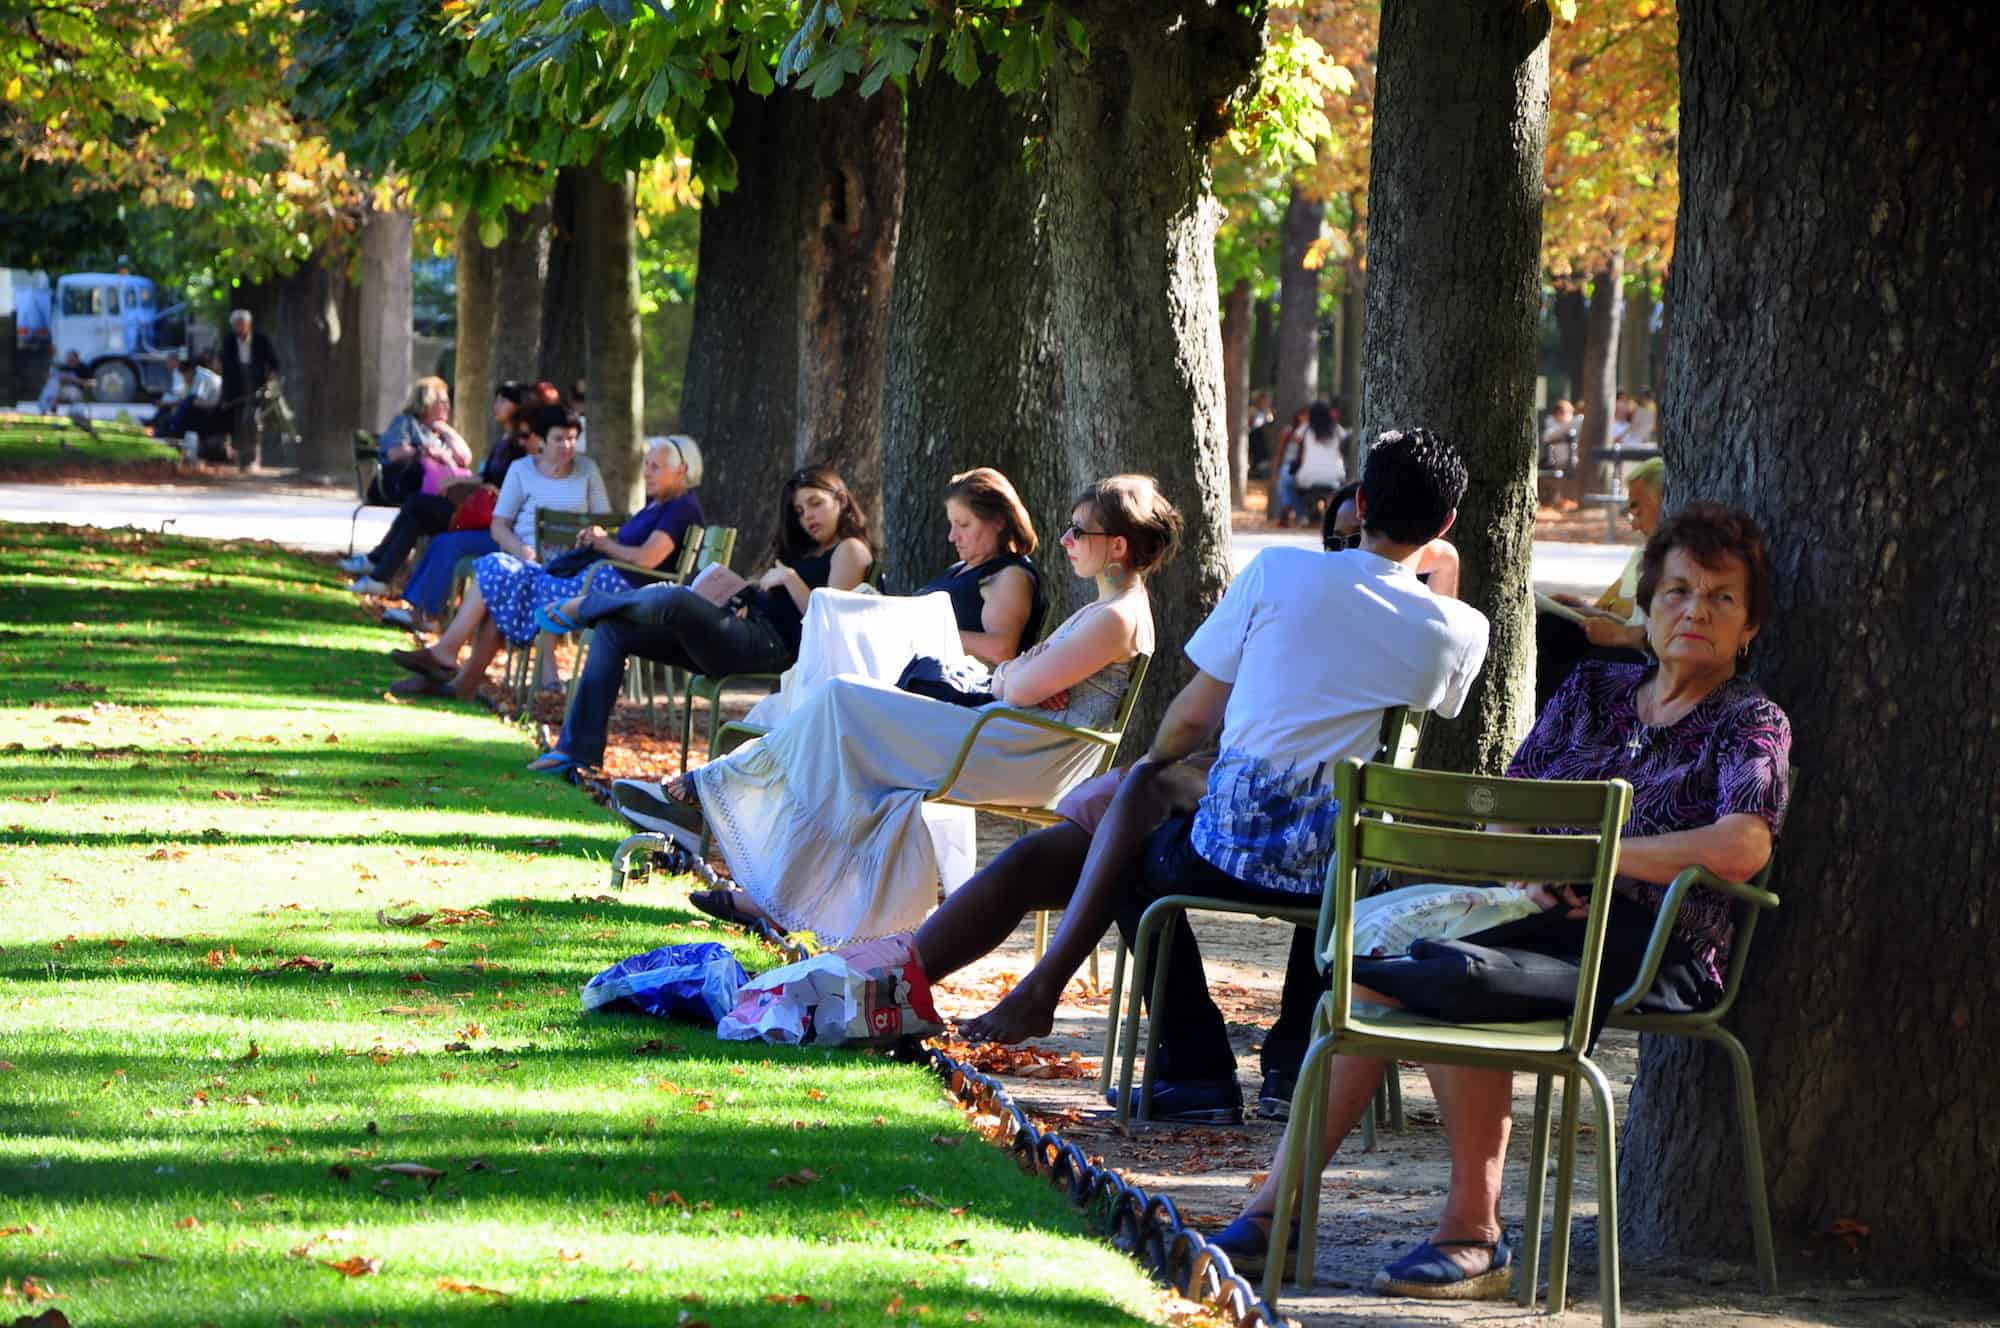 One of the best spots in Paris in summer is the Tuileries Gardens where locals come to sit under the streets to soak up the sunshine.